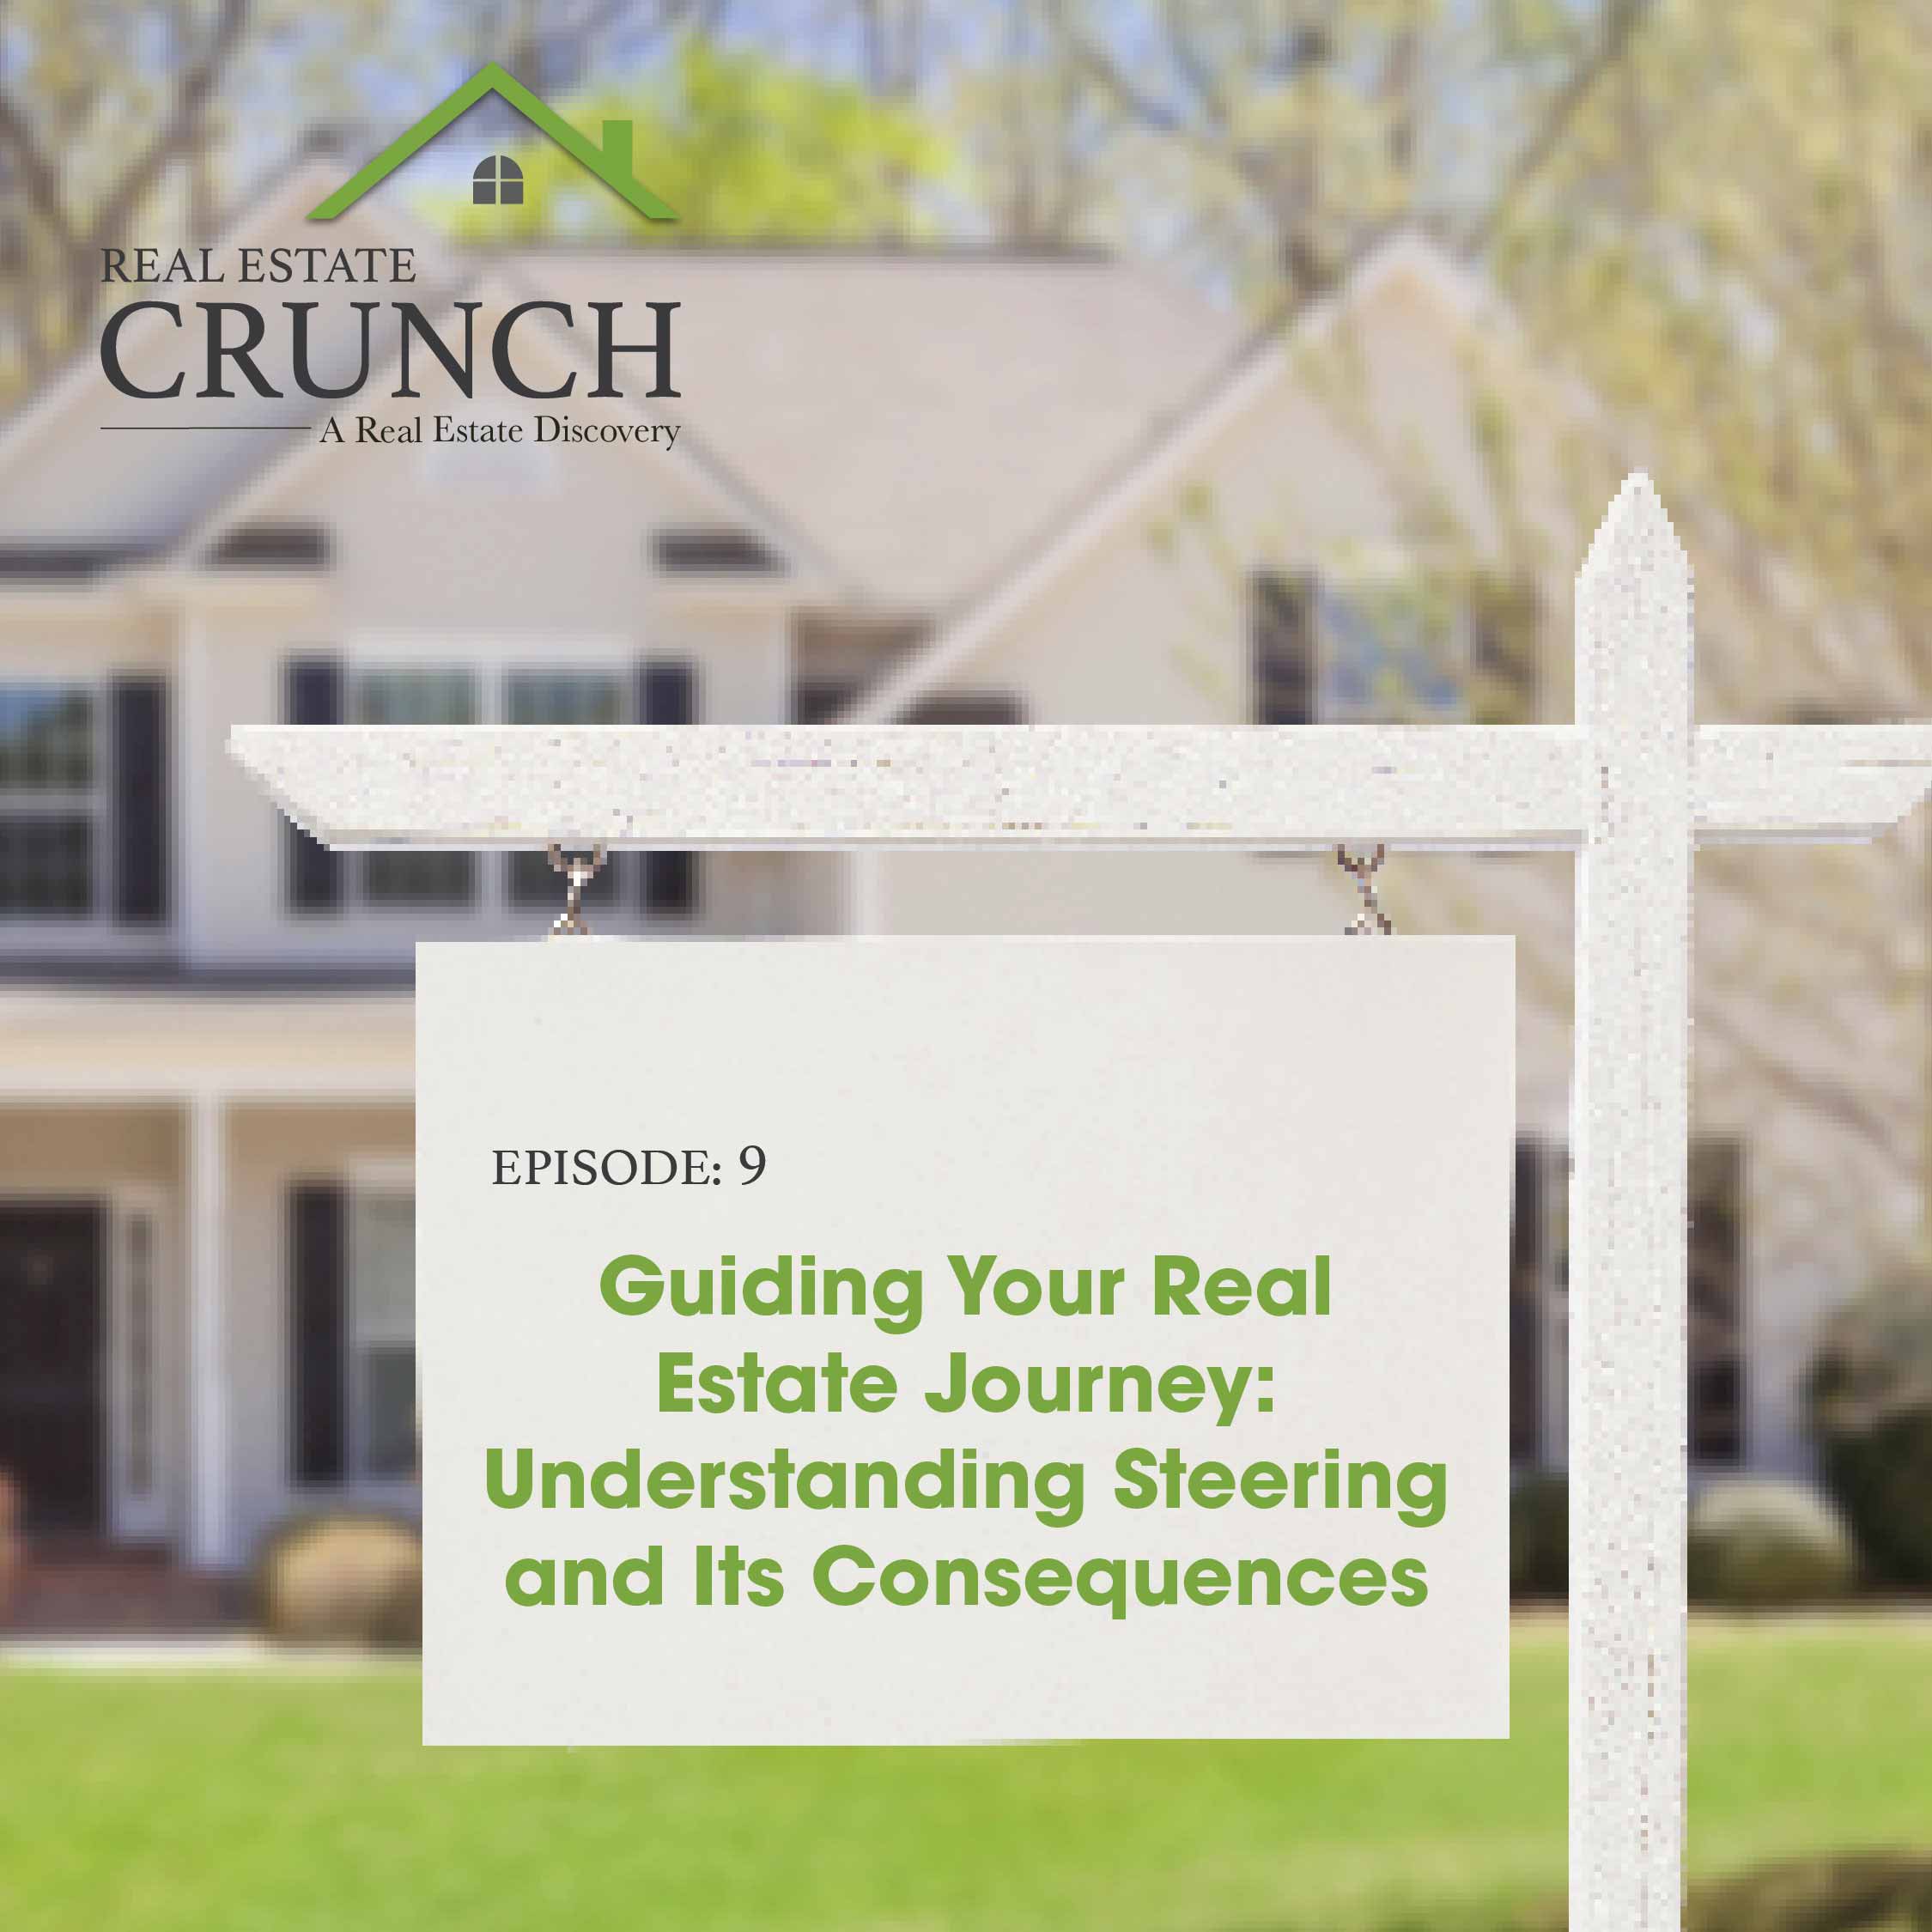 Guiding Your Real Estate Journey: Understanding Steering and Its Consequences